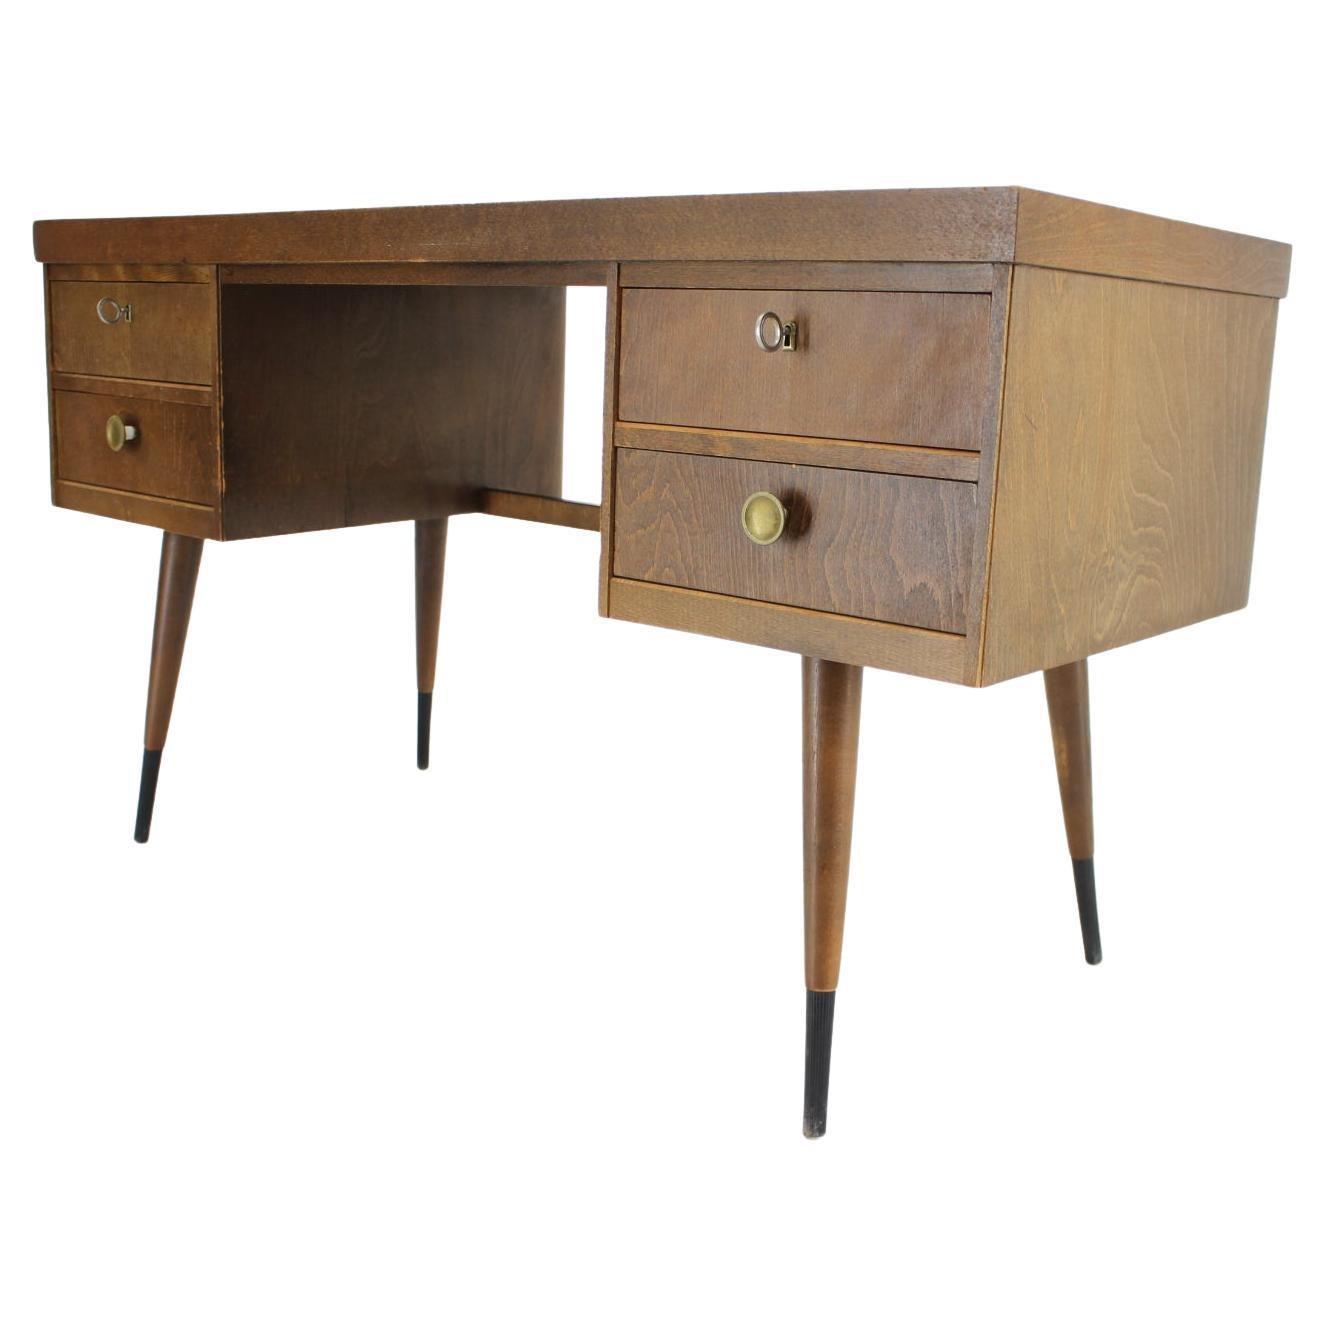 Design Midcentury Writing Table / Desk, Germany, 1960s For Sale